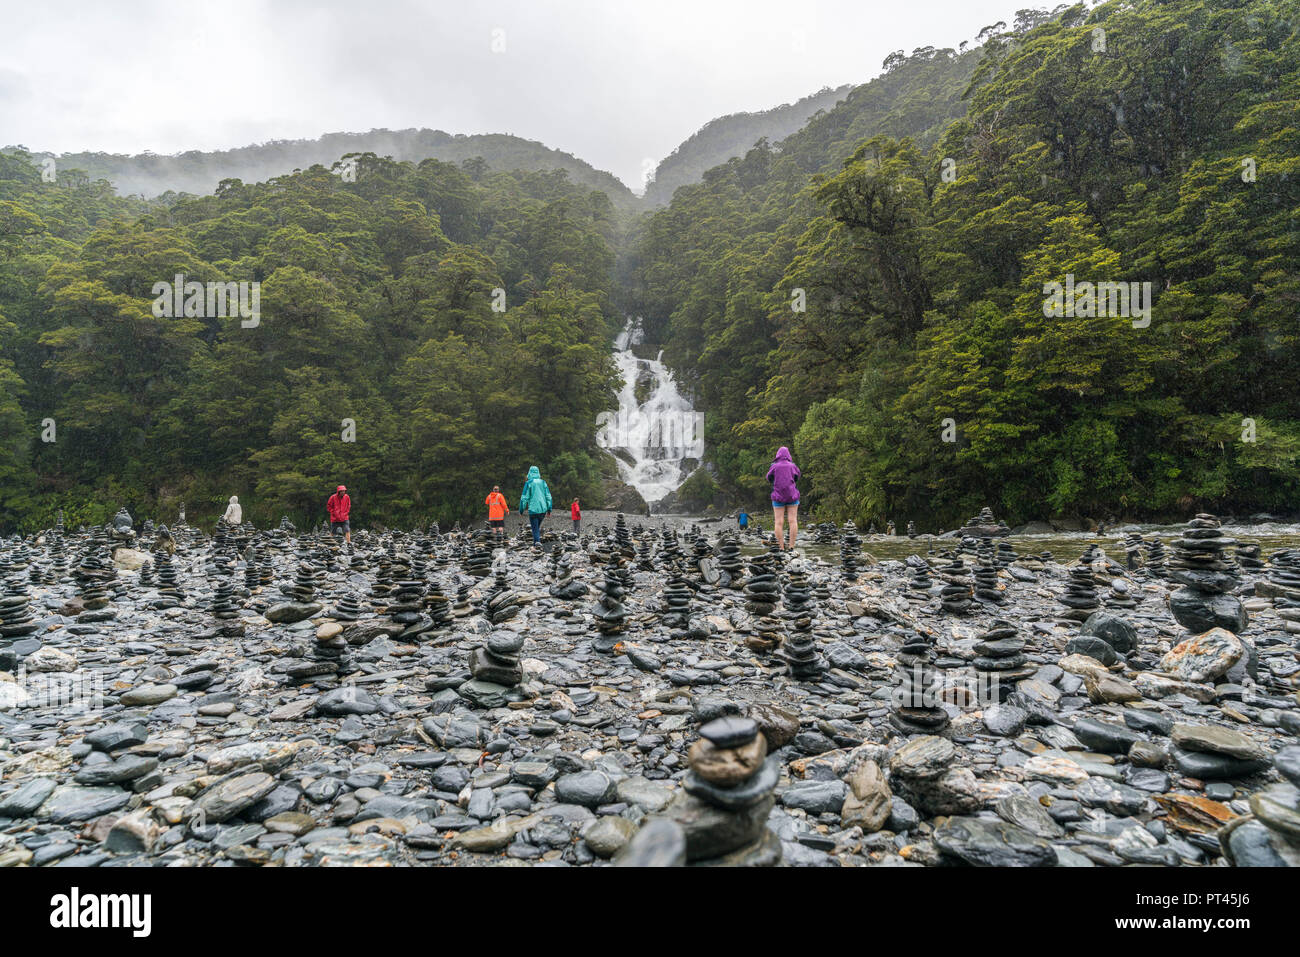 Tourists walking through rock cairns at Fantail Falls on a rainy day, Mount Aspiring National Park, West Coast region, South Island, New Zealand, Stock Photo